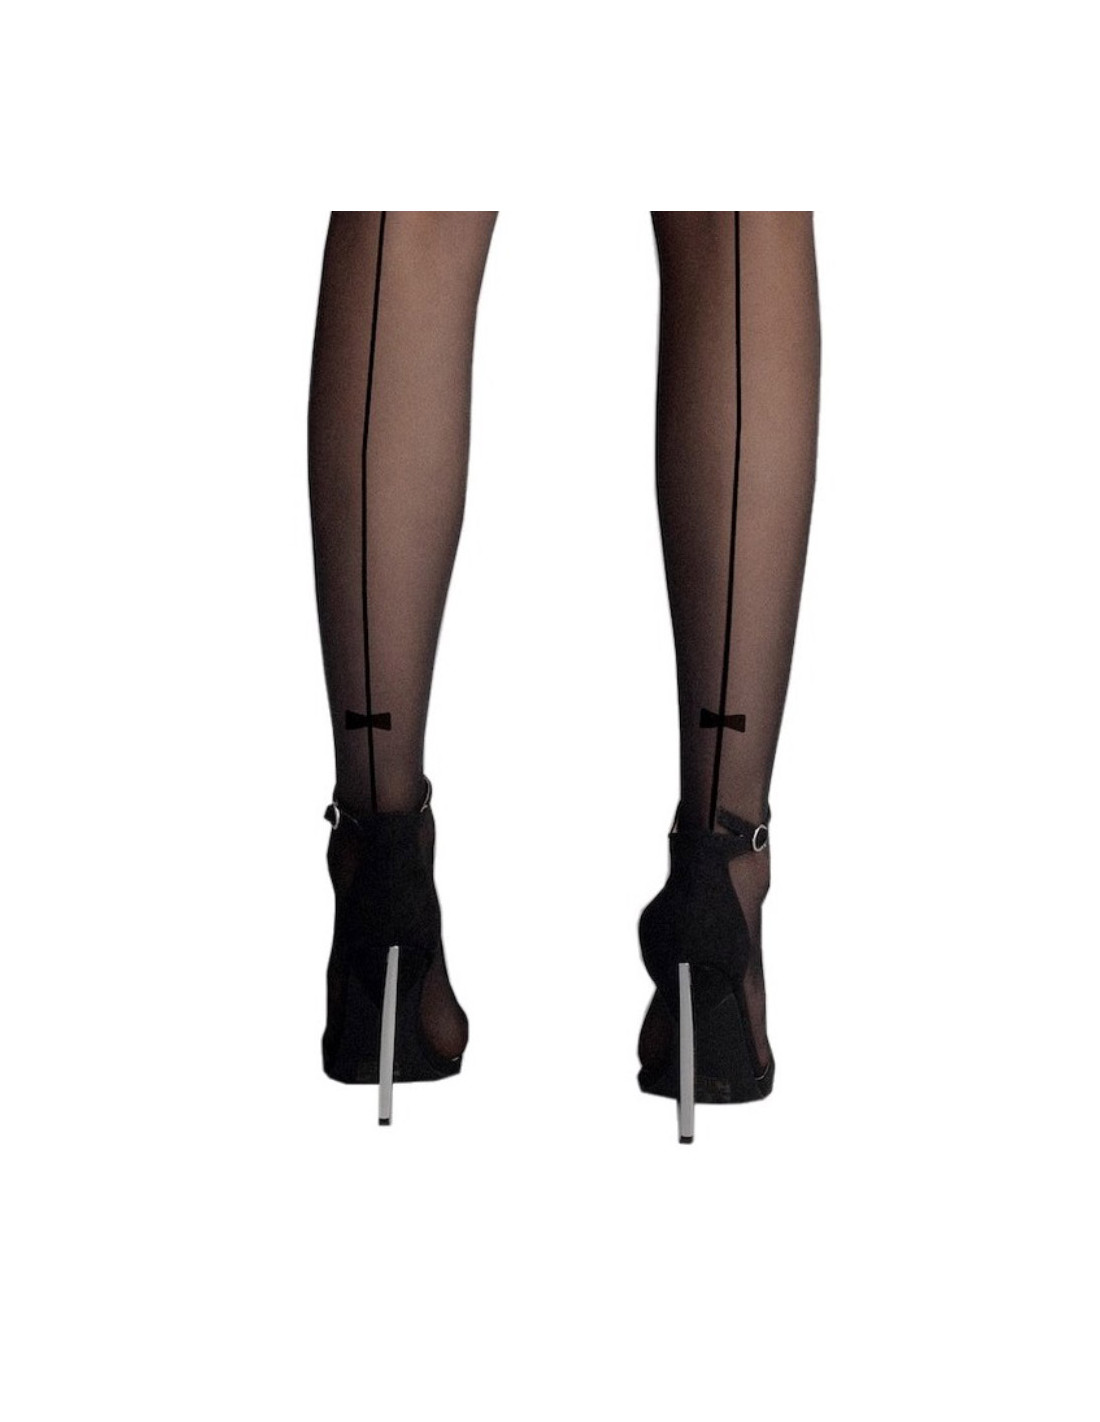 Fiore Collants a couture et motif Christy hgwZomZF